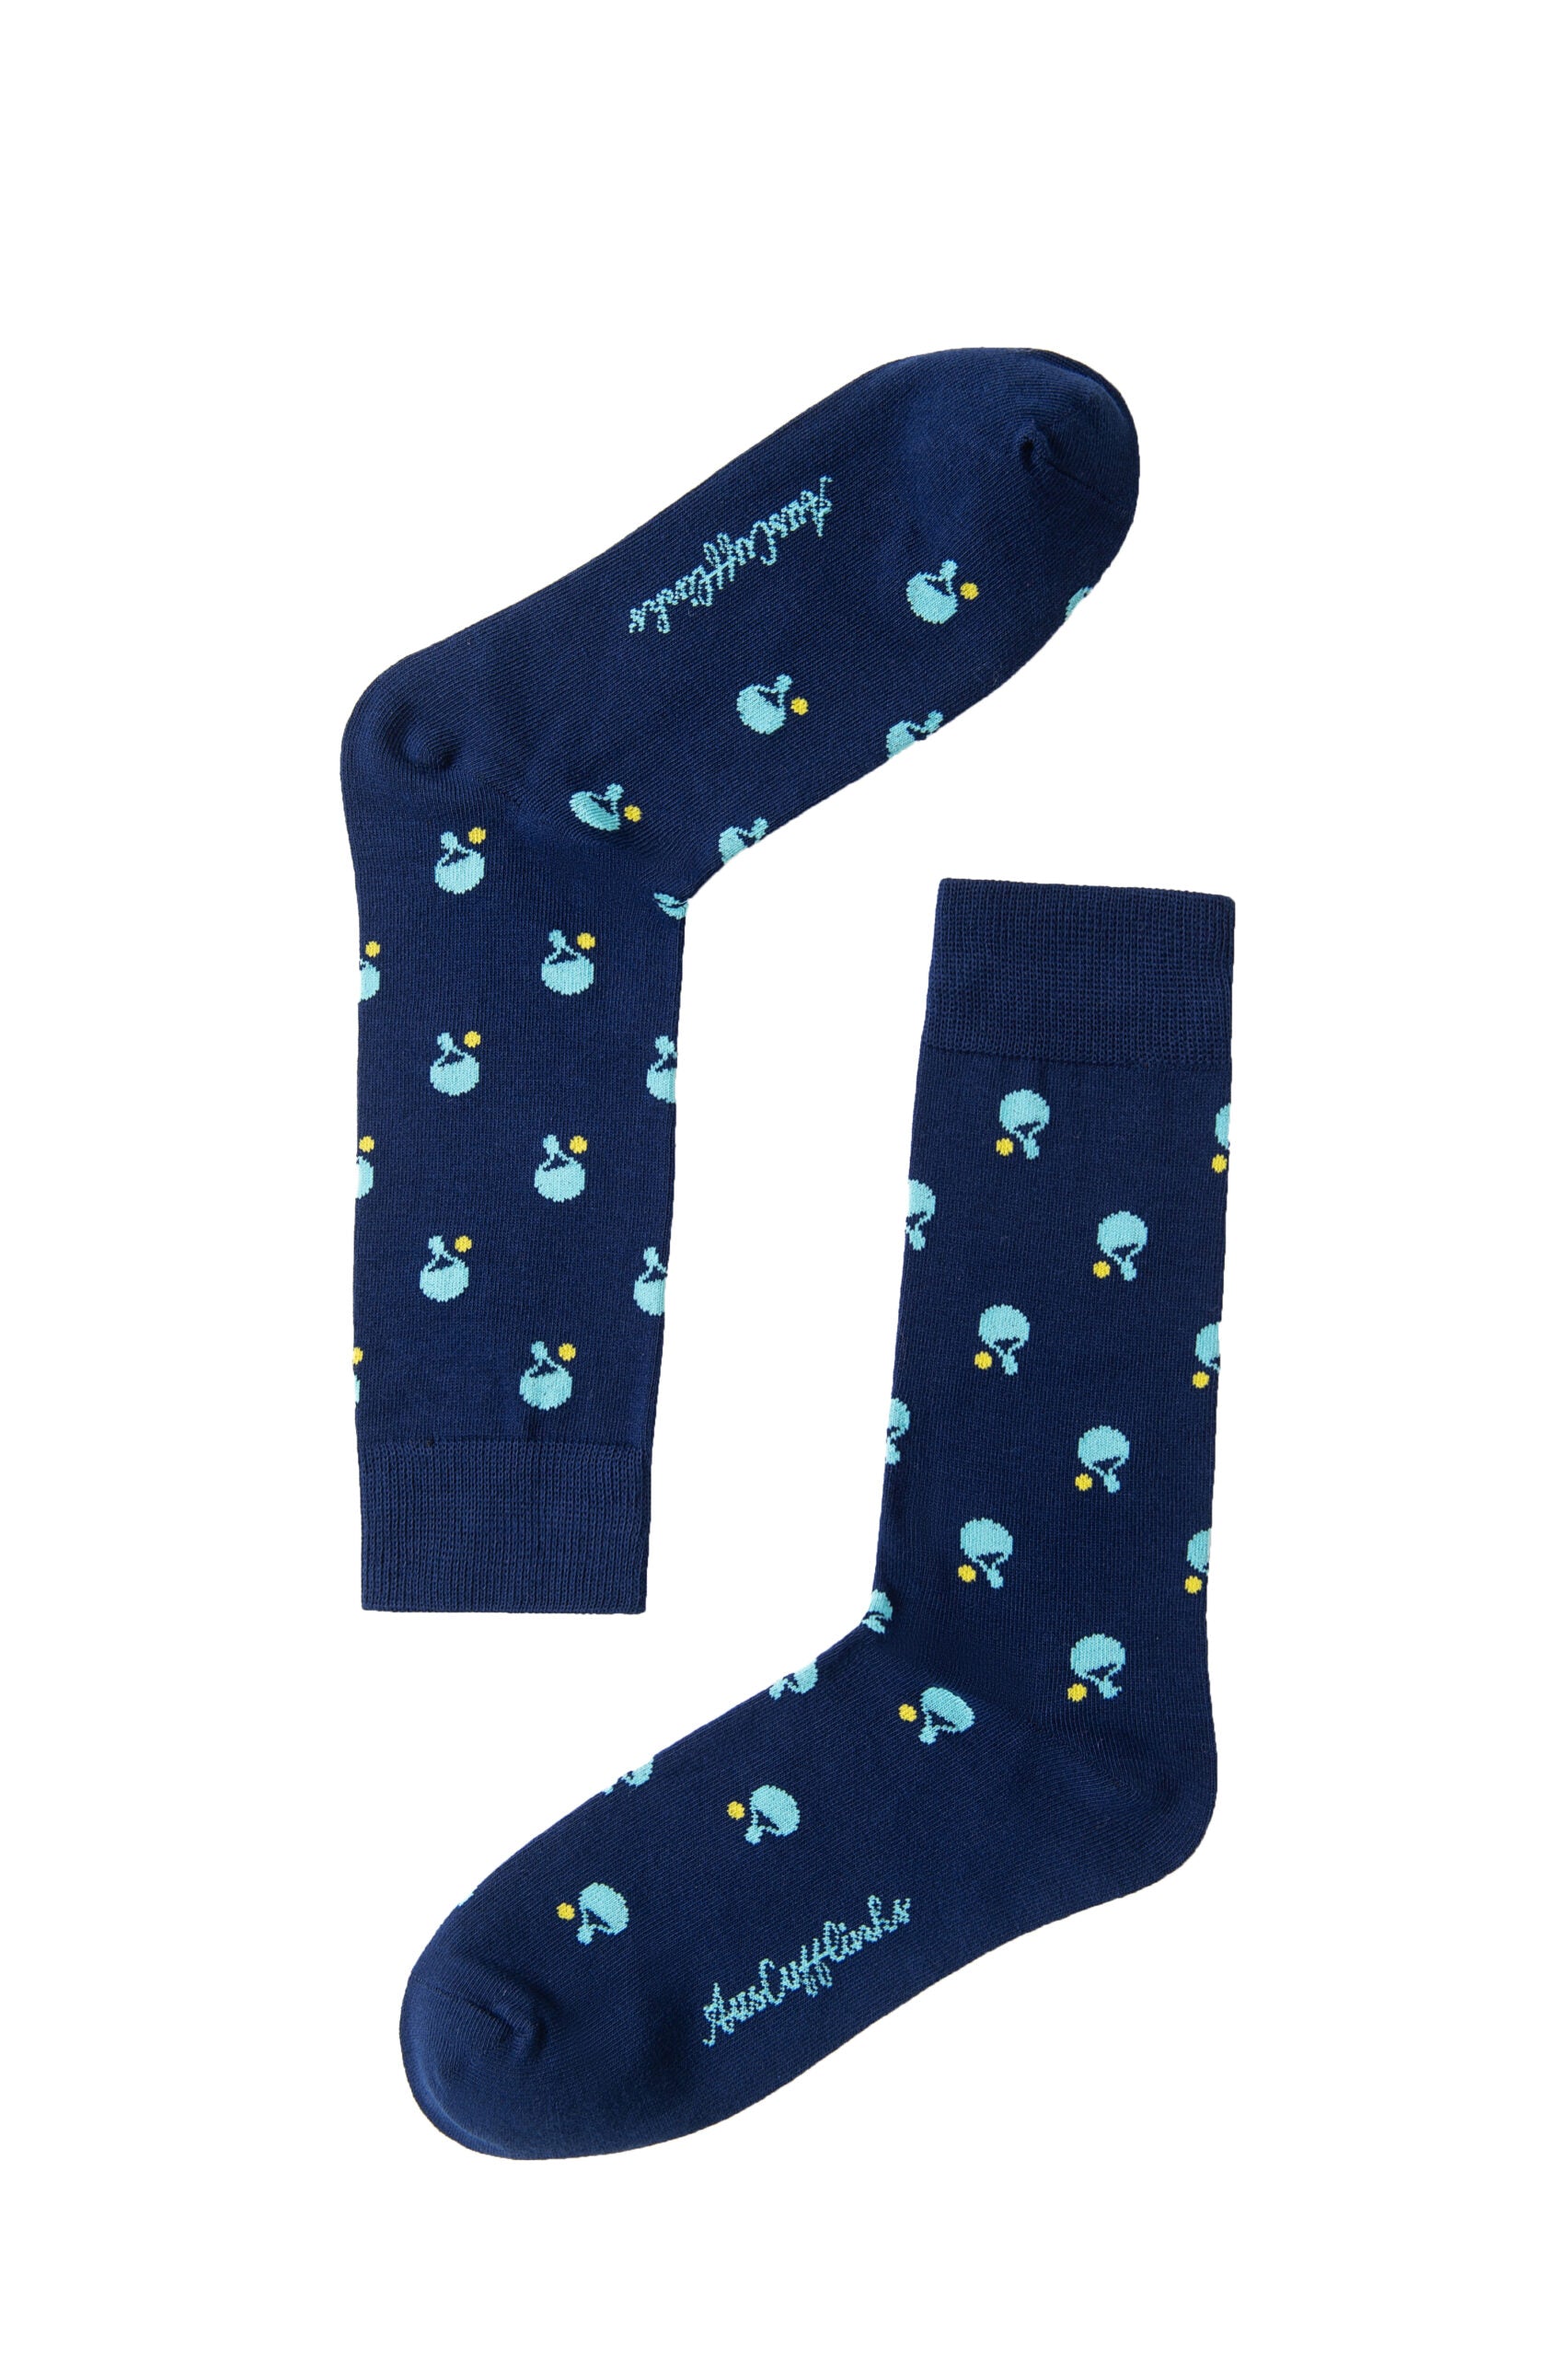 Two navy blue socks featuring a pattern of small light blue birds and yellow accents, positioned in an L-shape. The Table Tennis Socks, designed for feet perfection, have the branding text "Happy Socks" on the toe area.